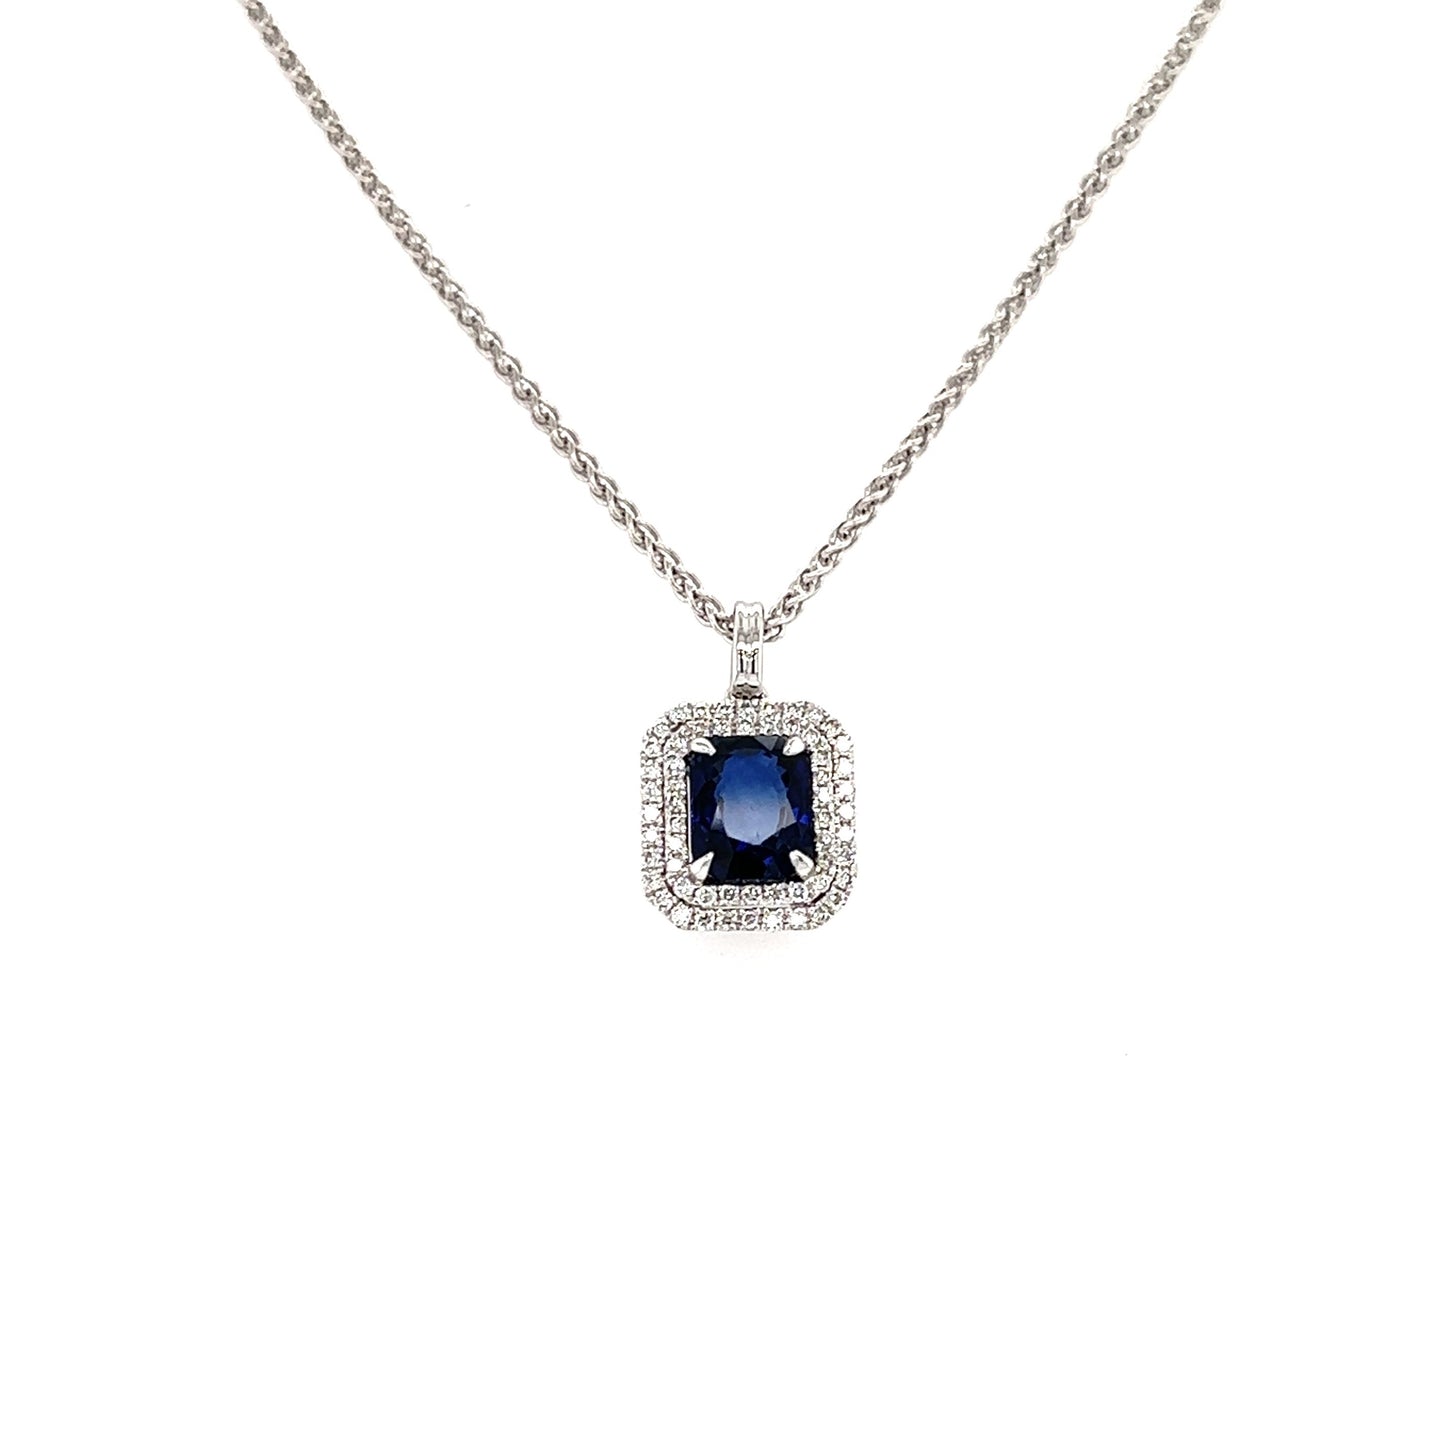 Cushion Sapphire Pendant with Double Diamond Halo in 18K White Gold Pendant and Chain Front View Alternative